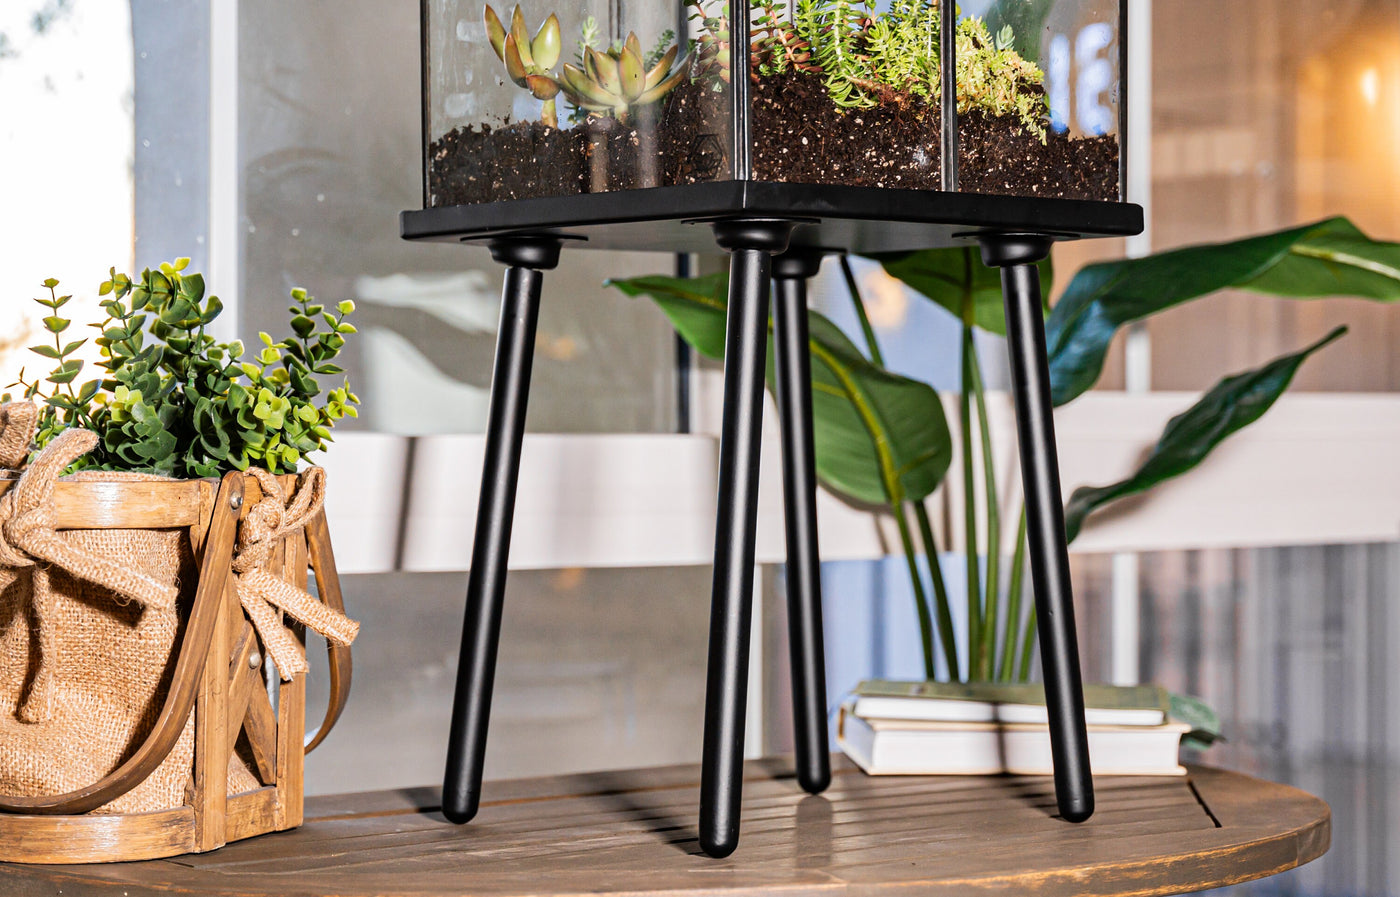 UB Extra Large Terrarium, Glass and Steel, Perfect for: Indoor Garden, Succulents, Cacti, Fern, Christmas and Wedding Gifts. (Black)